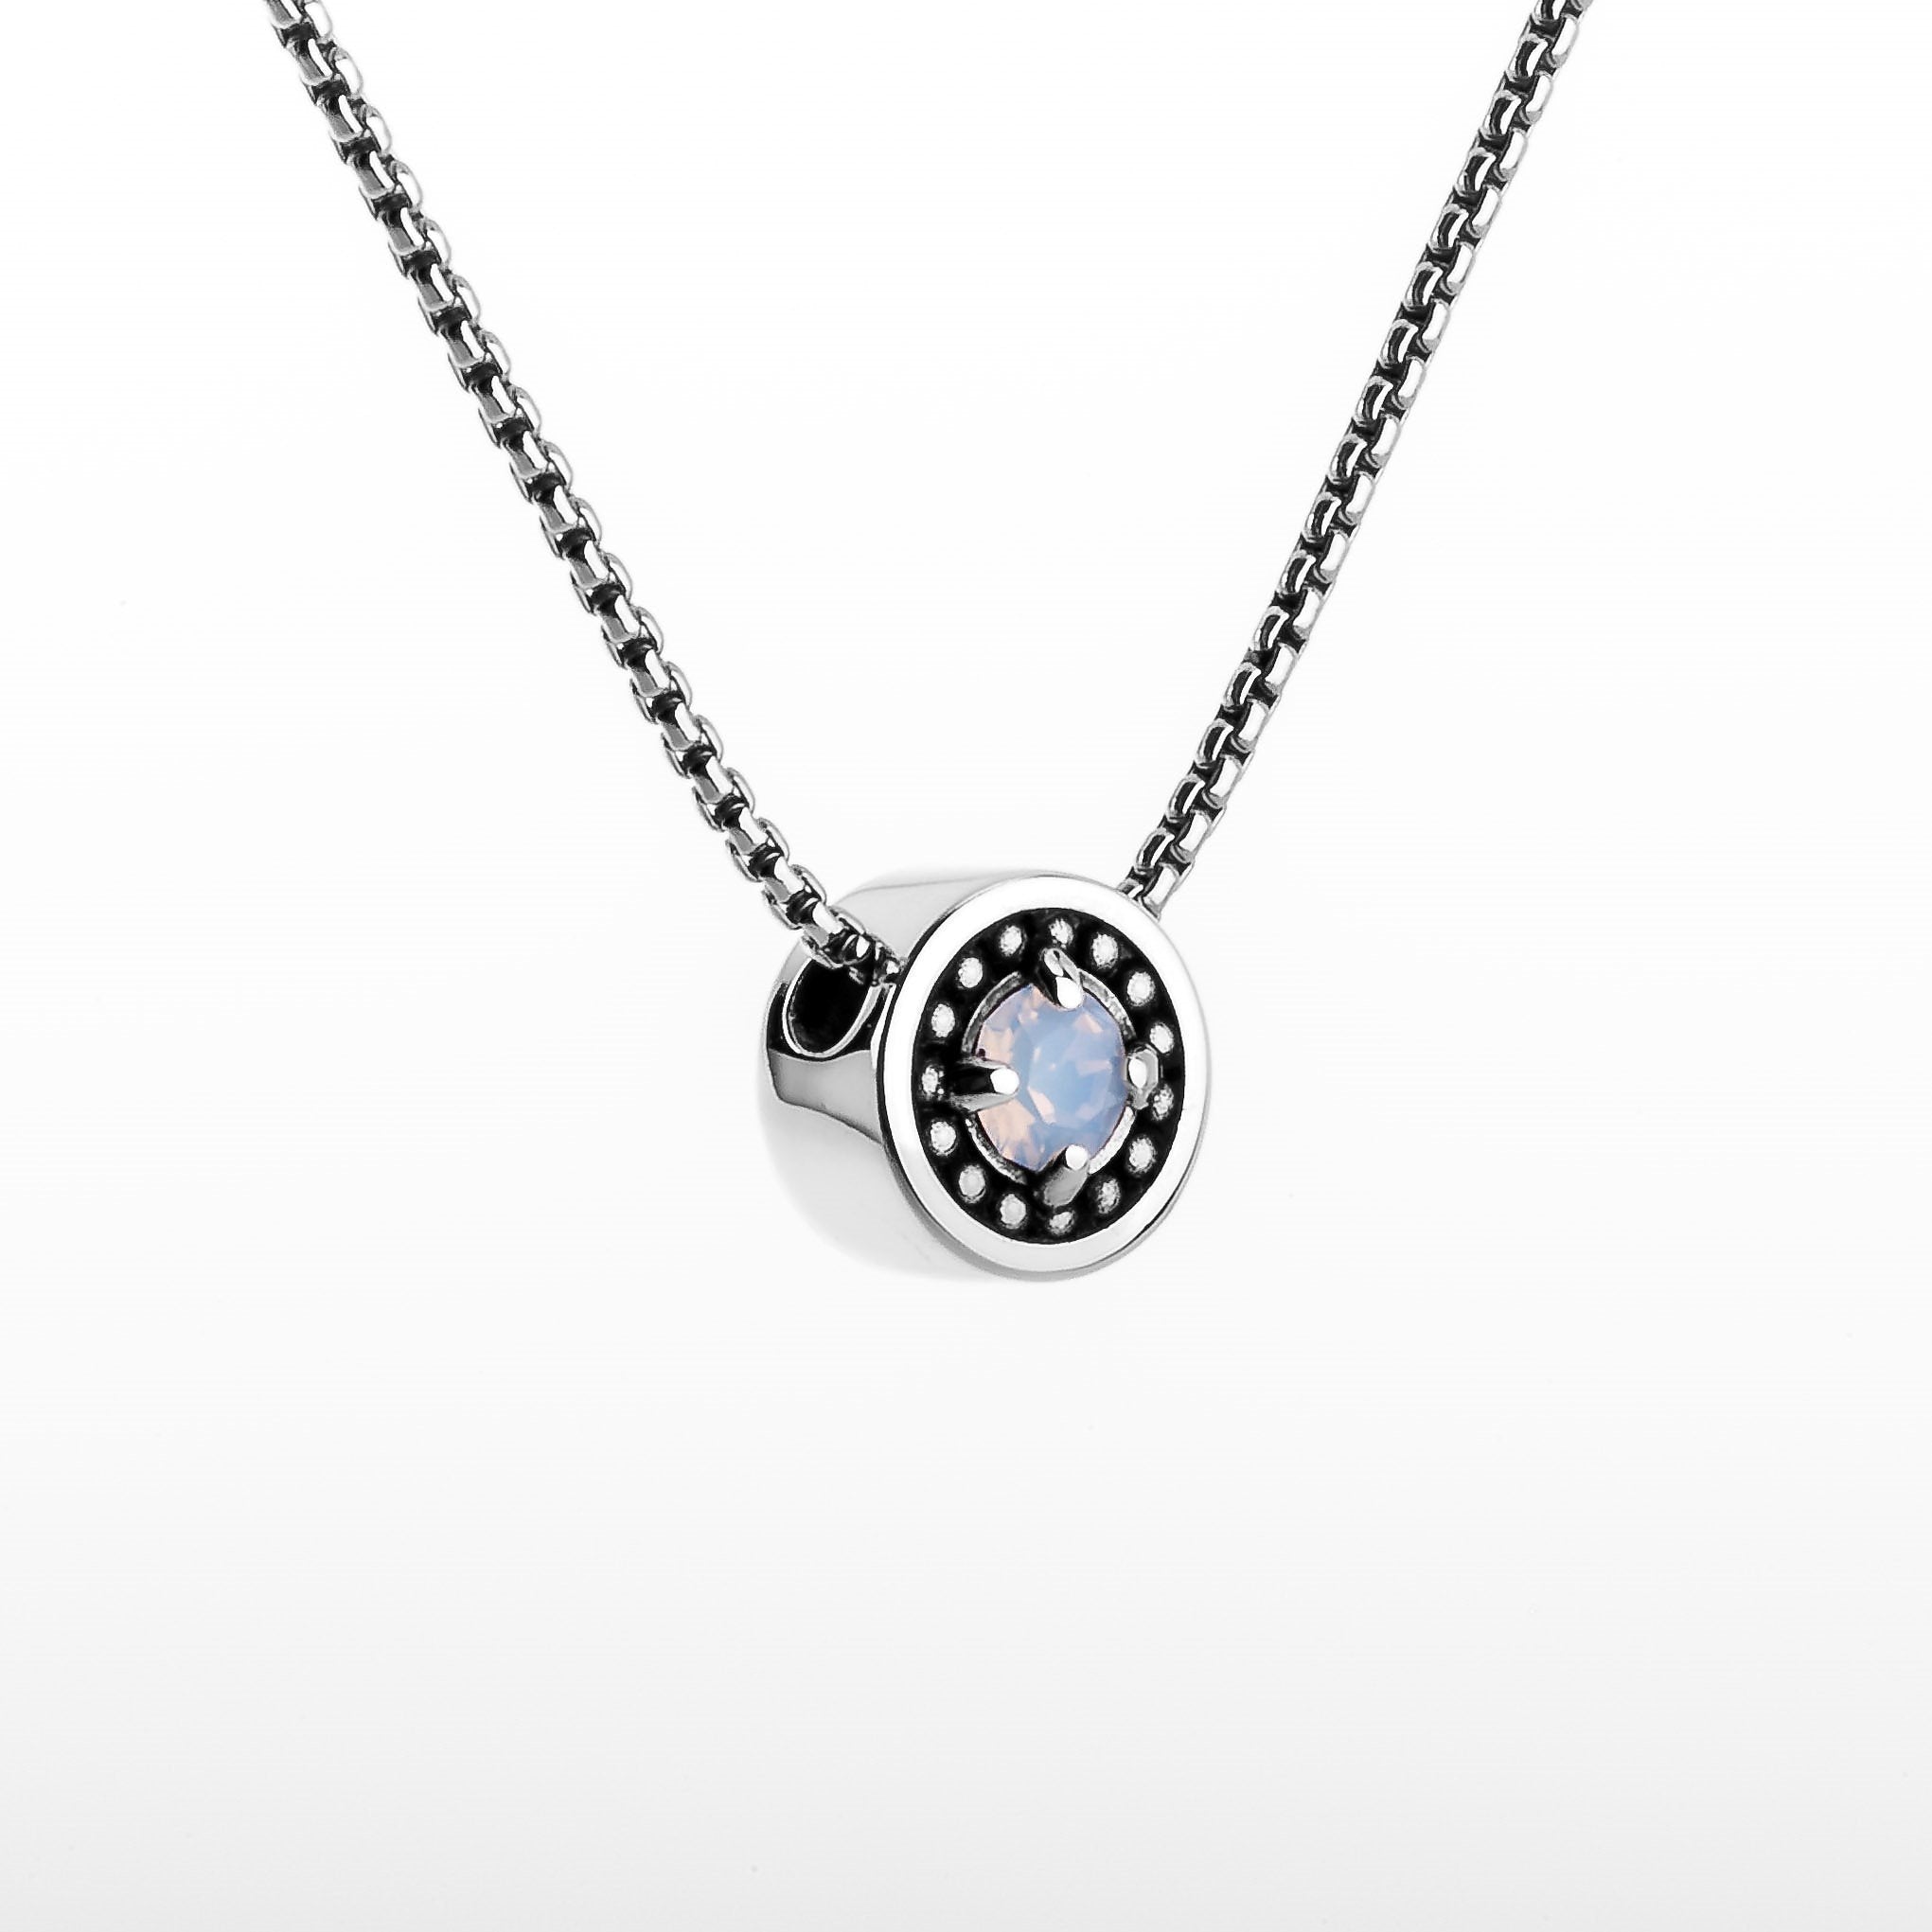 October Birthstone Necklace - The Generations "Petite"